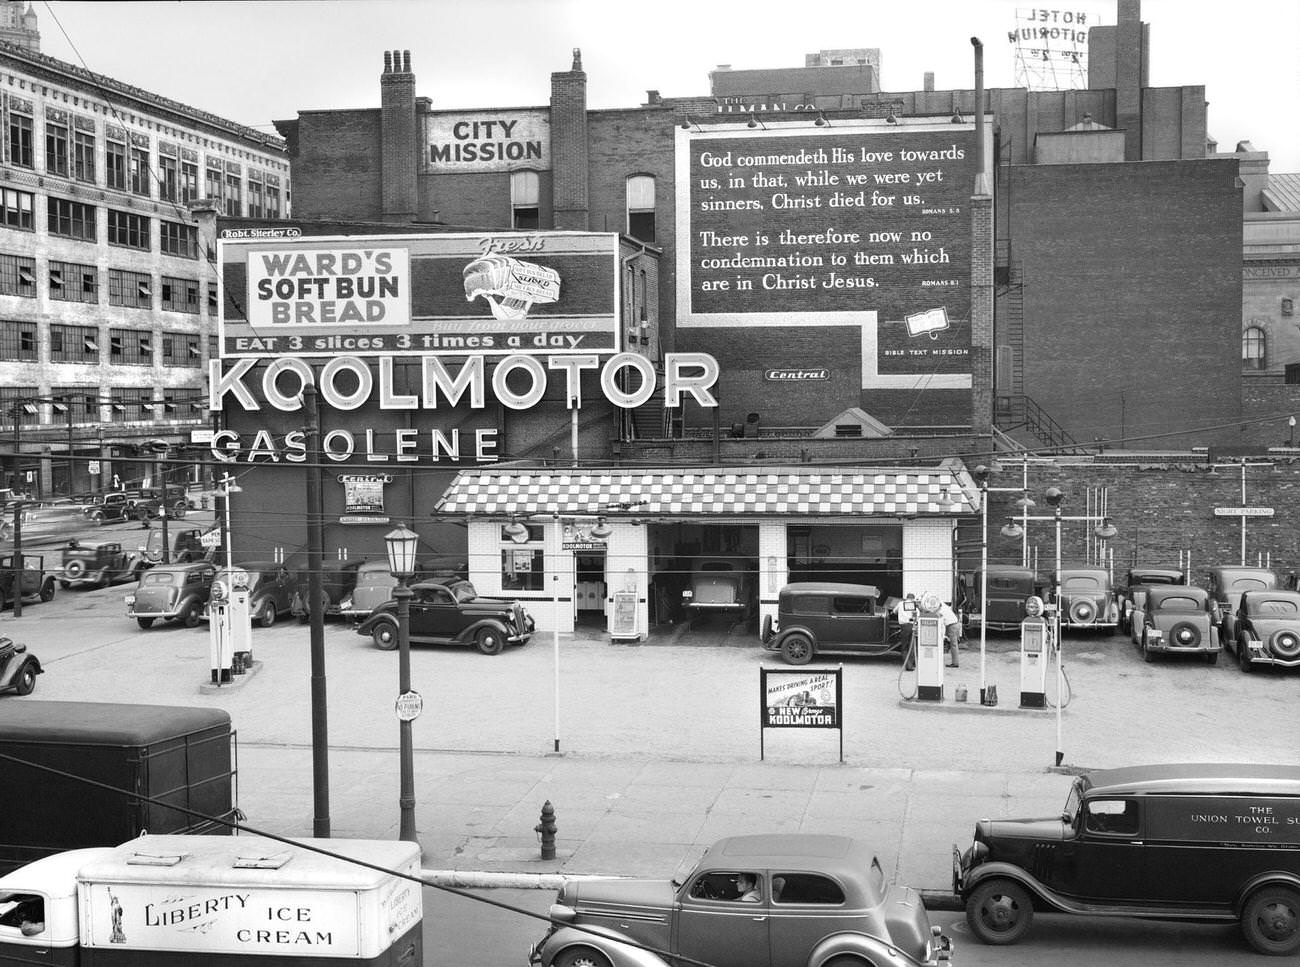 Gas Station and Gospel Mission in Cleveland, Ohio, 1937.